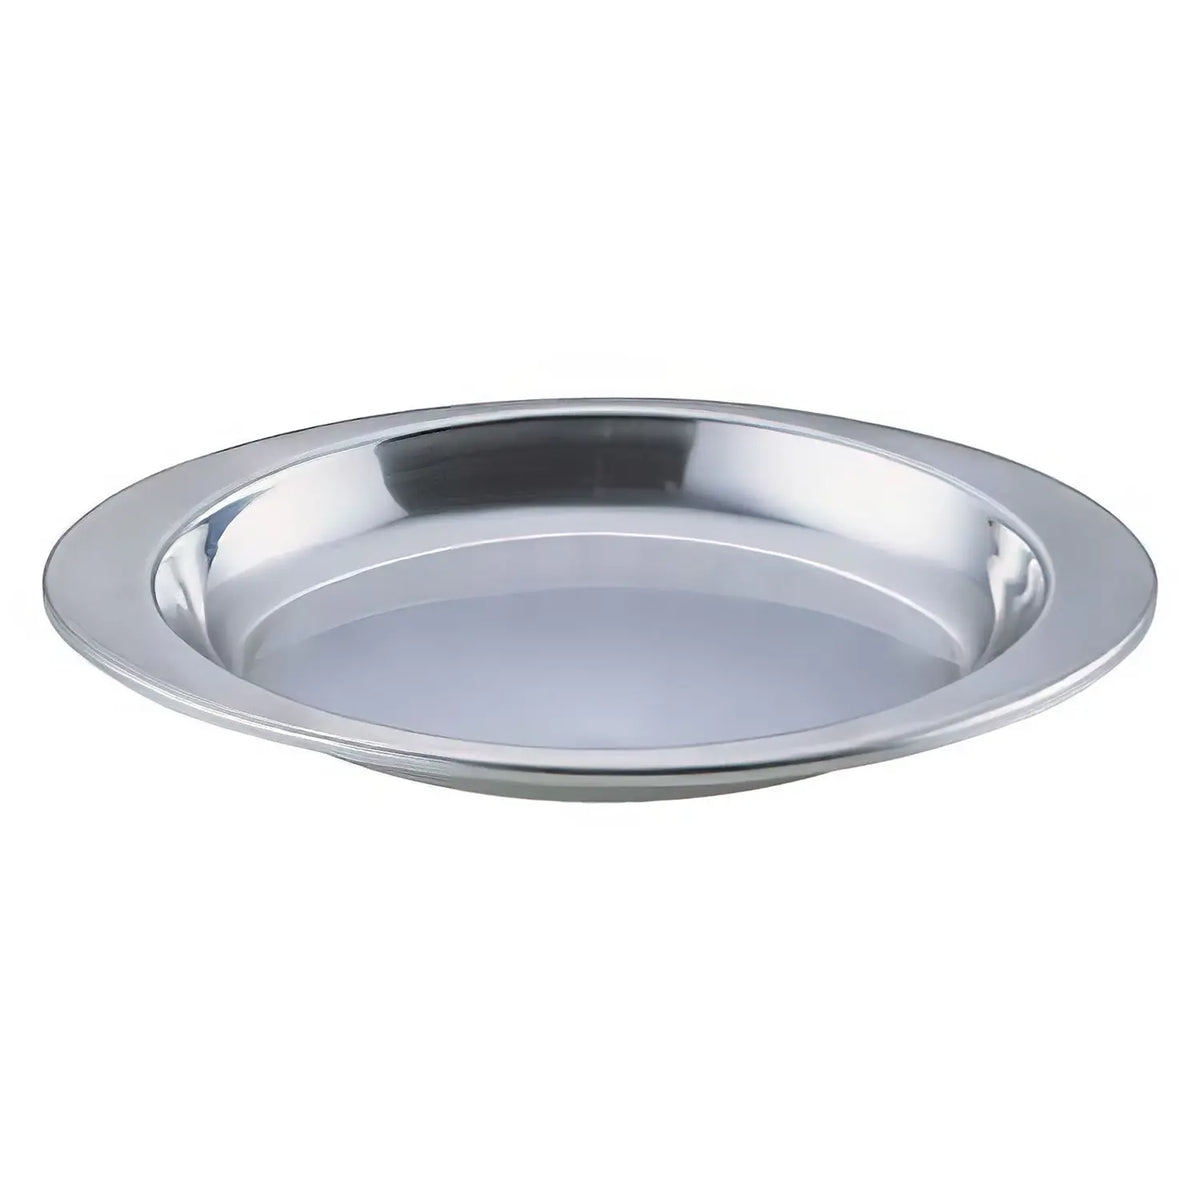 IKD Ecoclean Stainless Steel Oval Lunch Plate